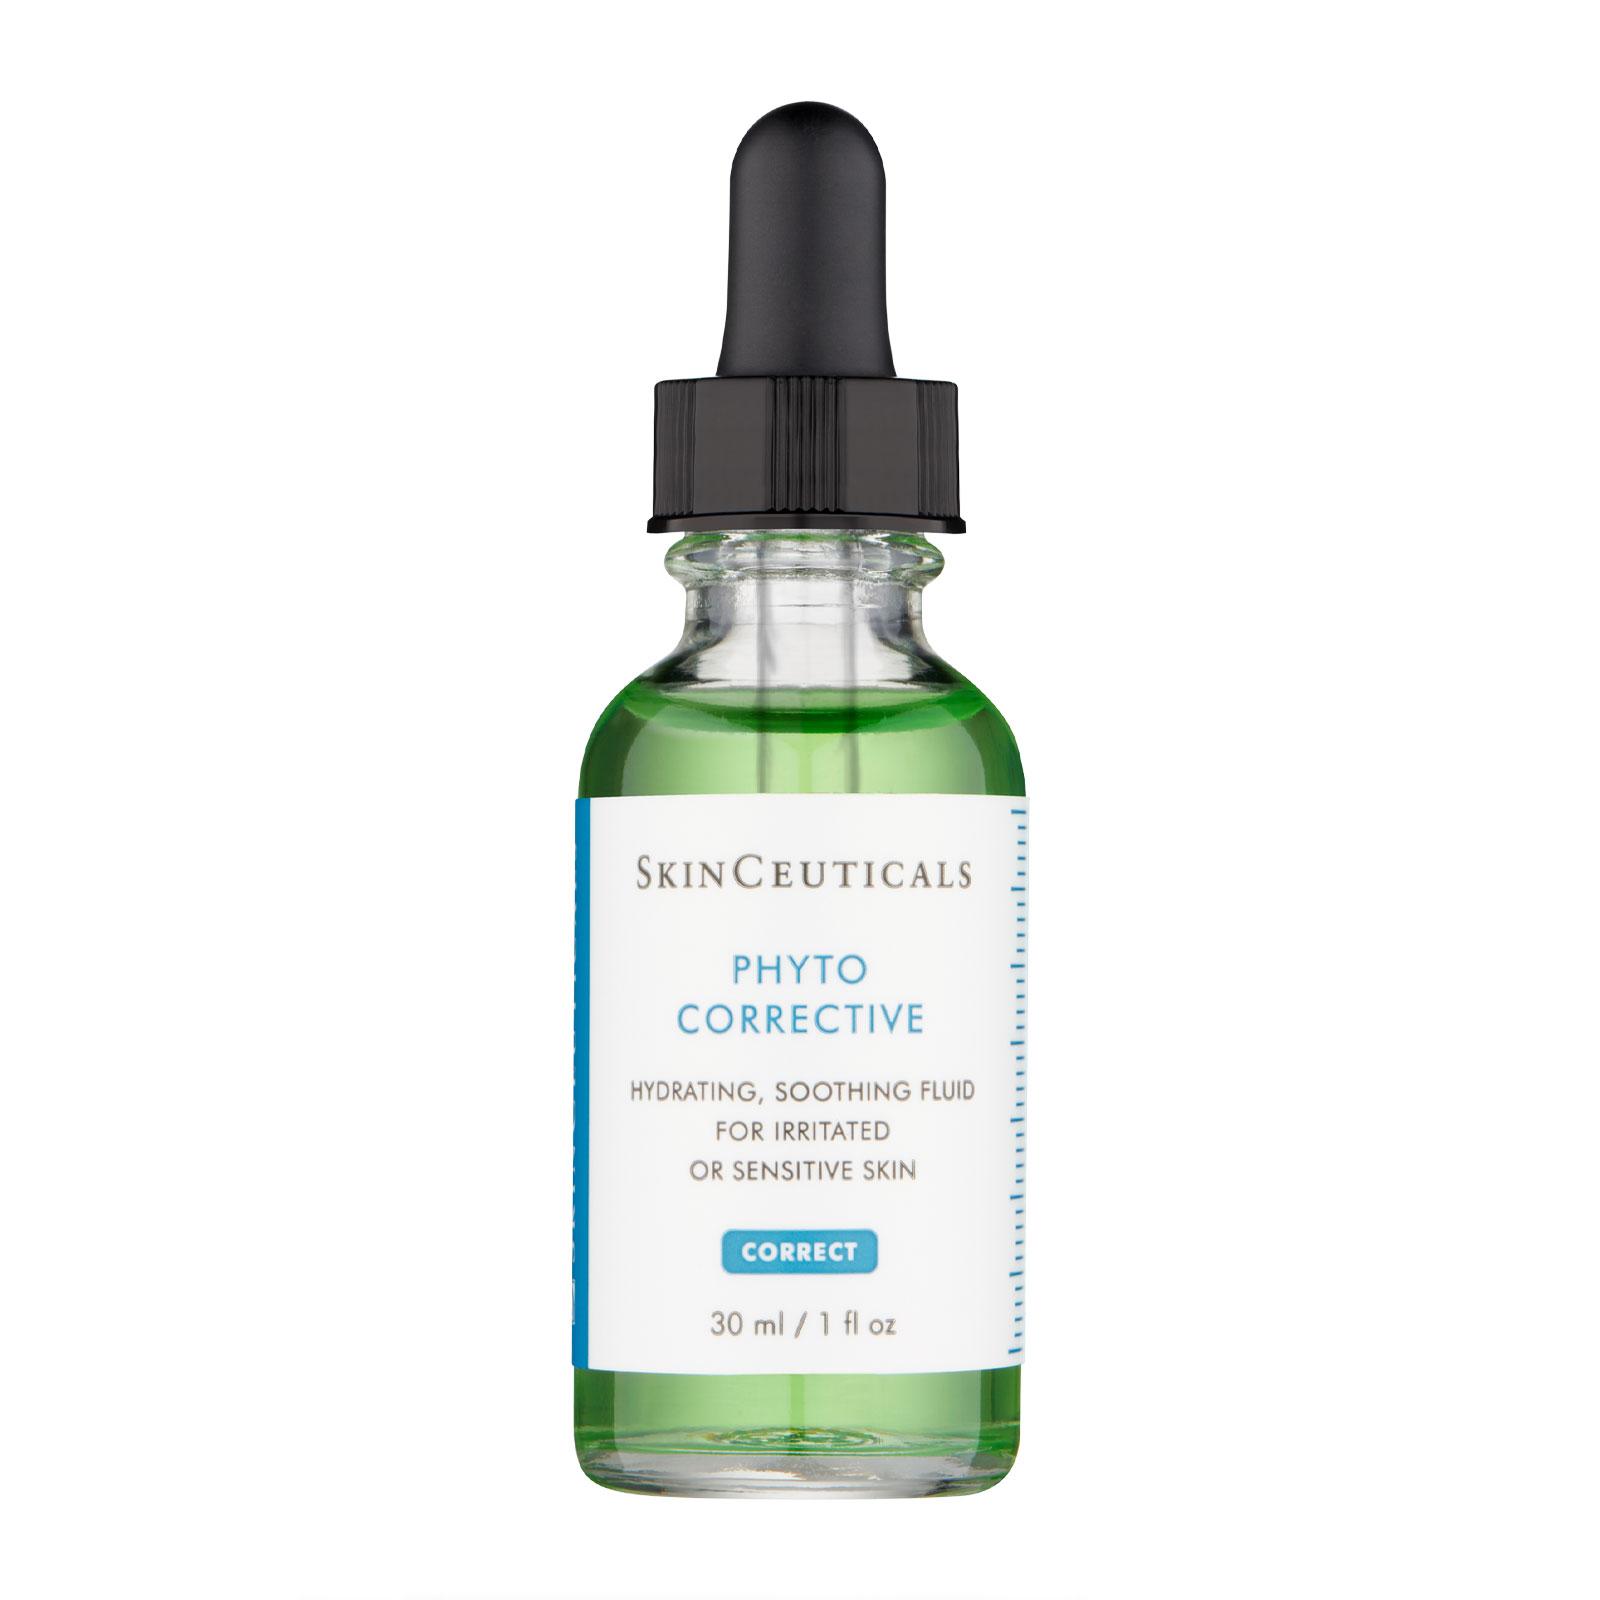 SkinCeuticals Phyto Corrective Hyaluronic Acid Serum Gel 30ml £60.00 at Feelunique